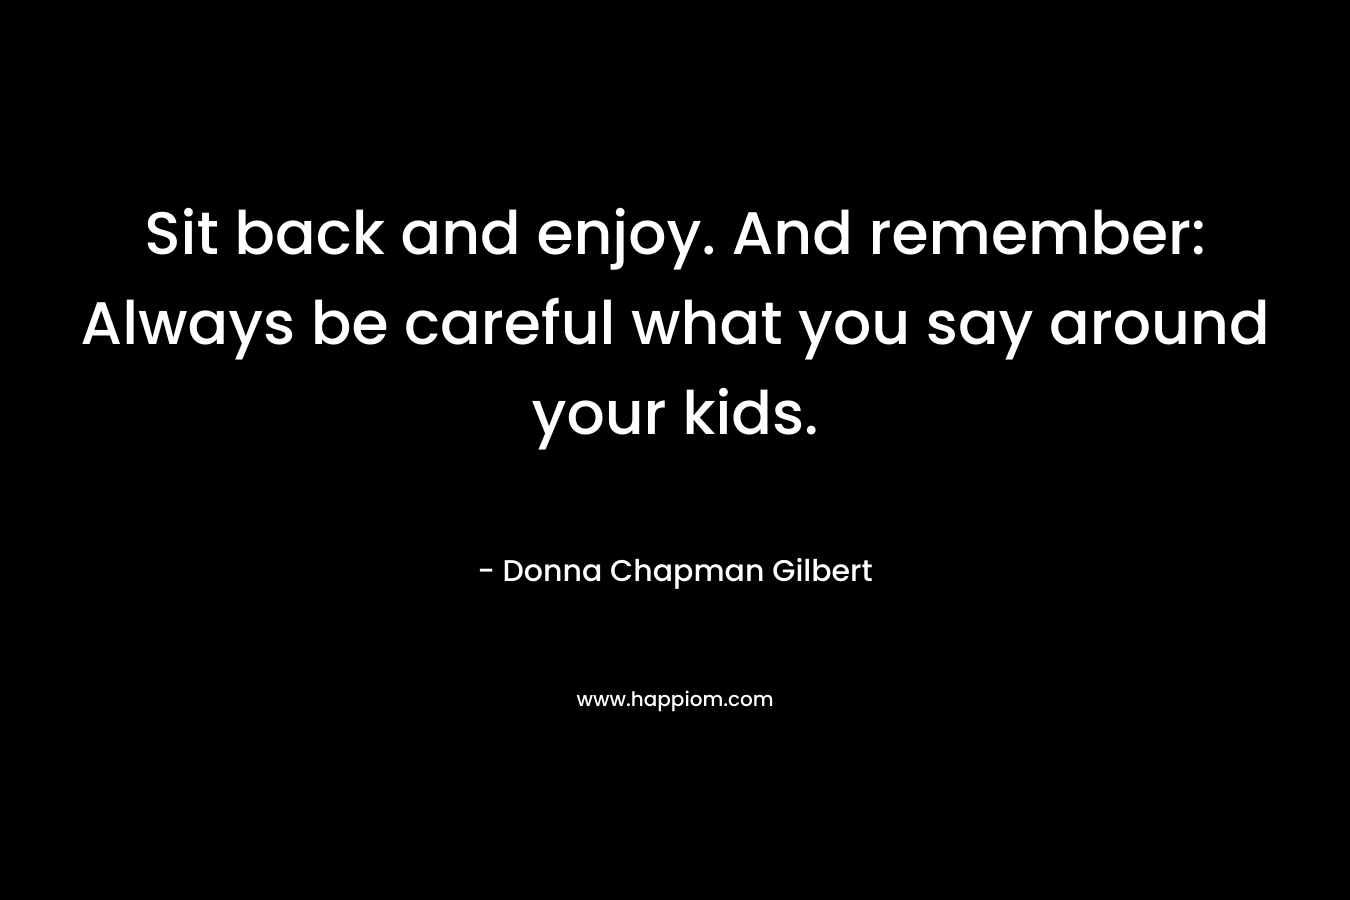 Sit back and enjoy. And remember: Always be careful what you say around your kids. – Donna Chapman Gilbert